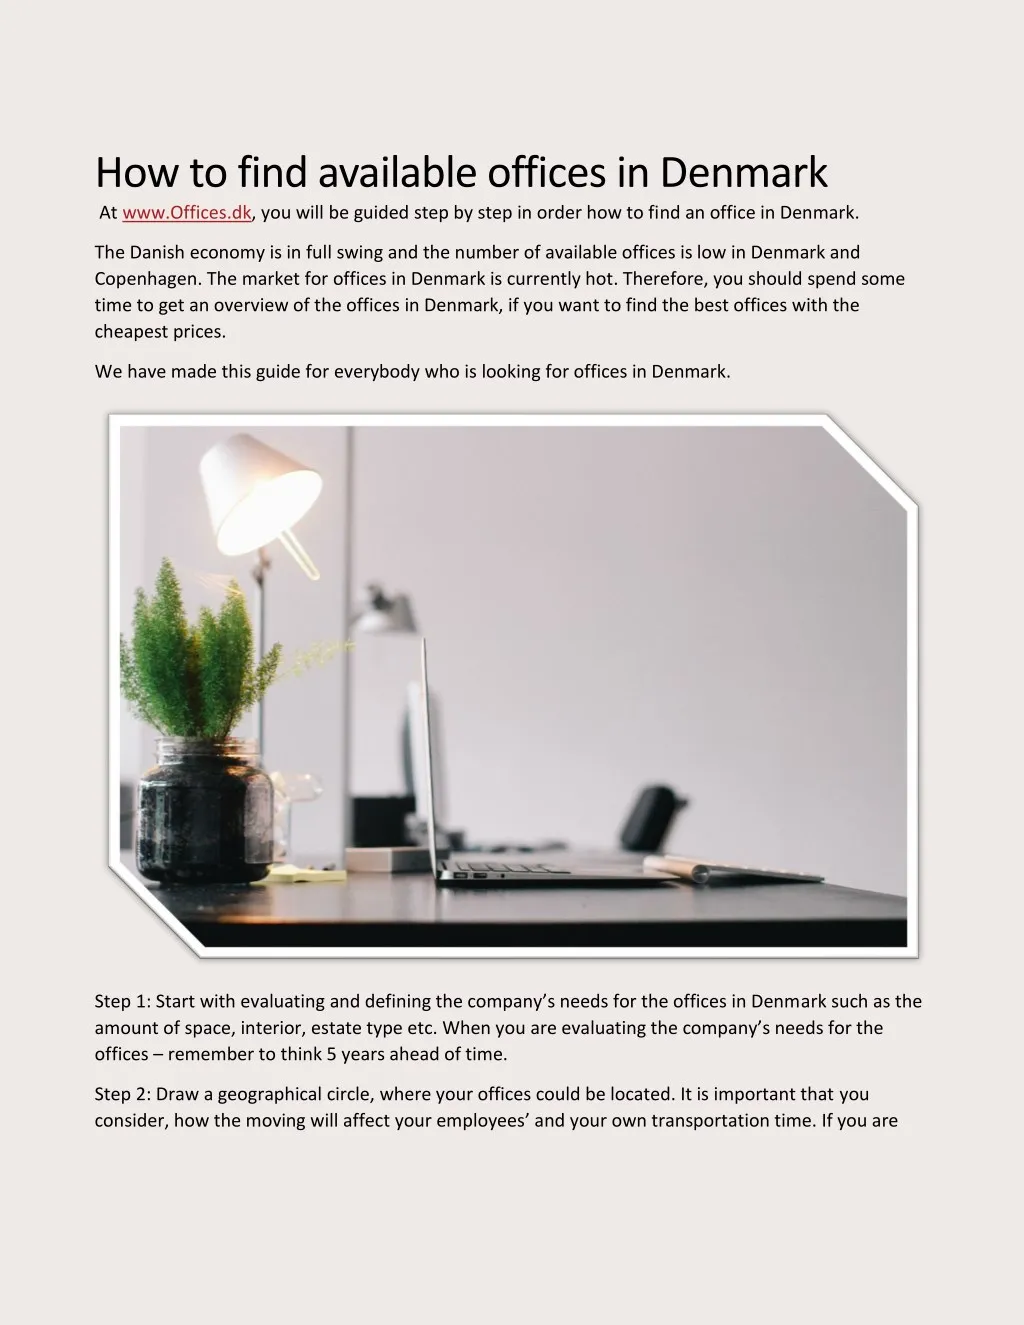 how to find available offices in denmark